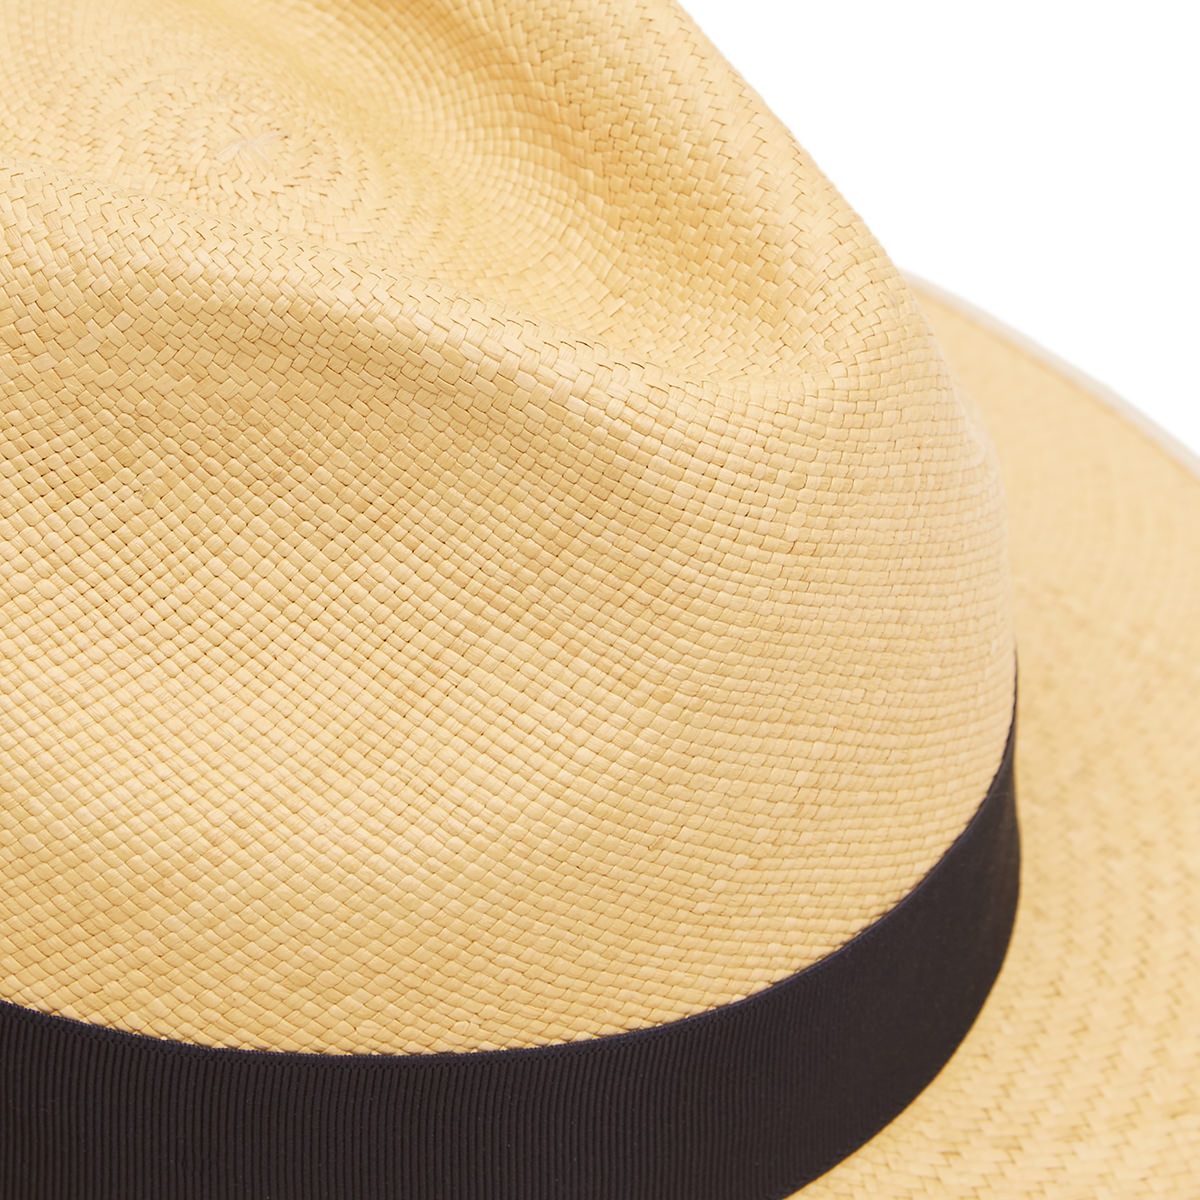 Classic Down Brim Panama Hat with Navy Band - Natural